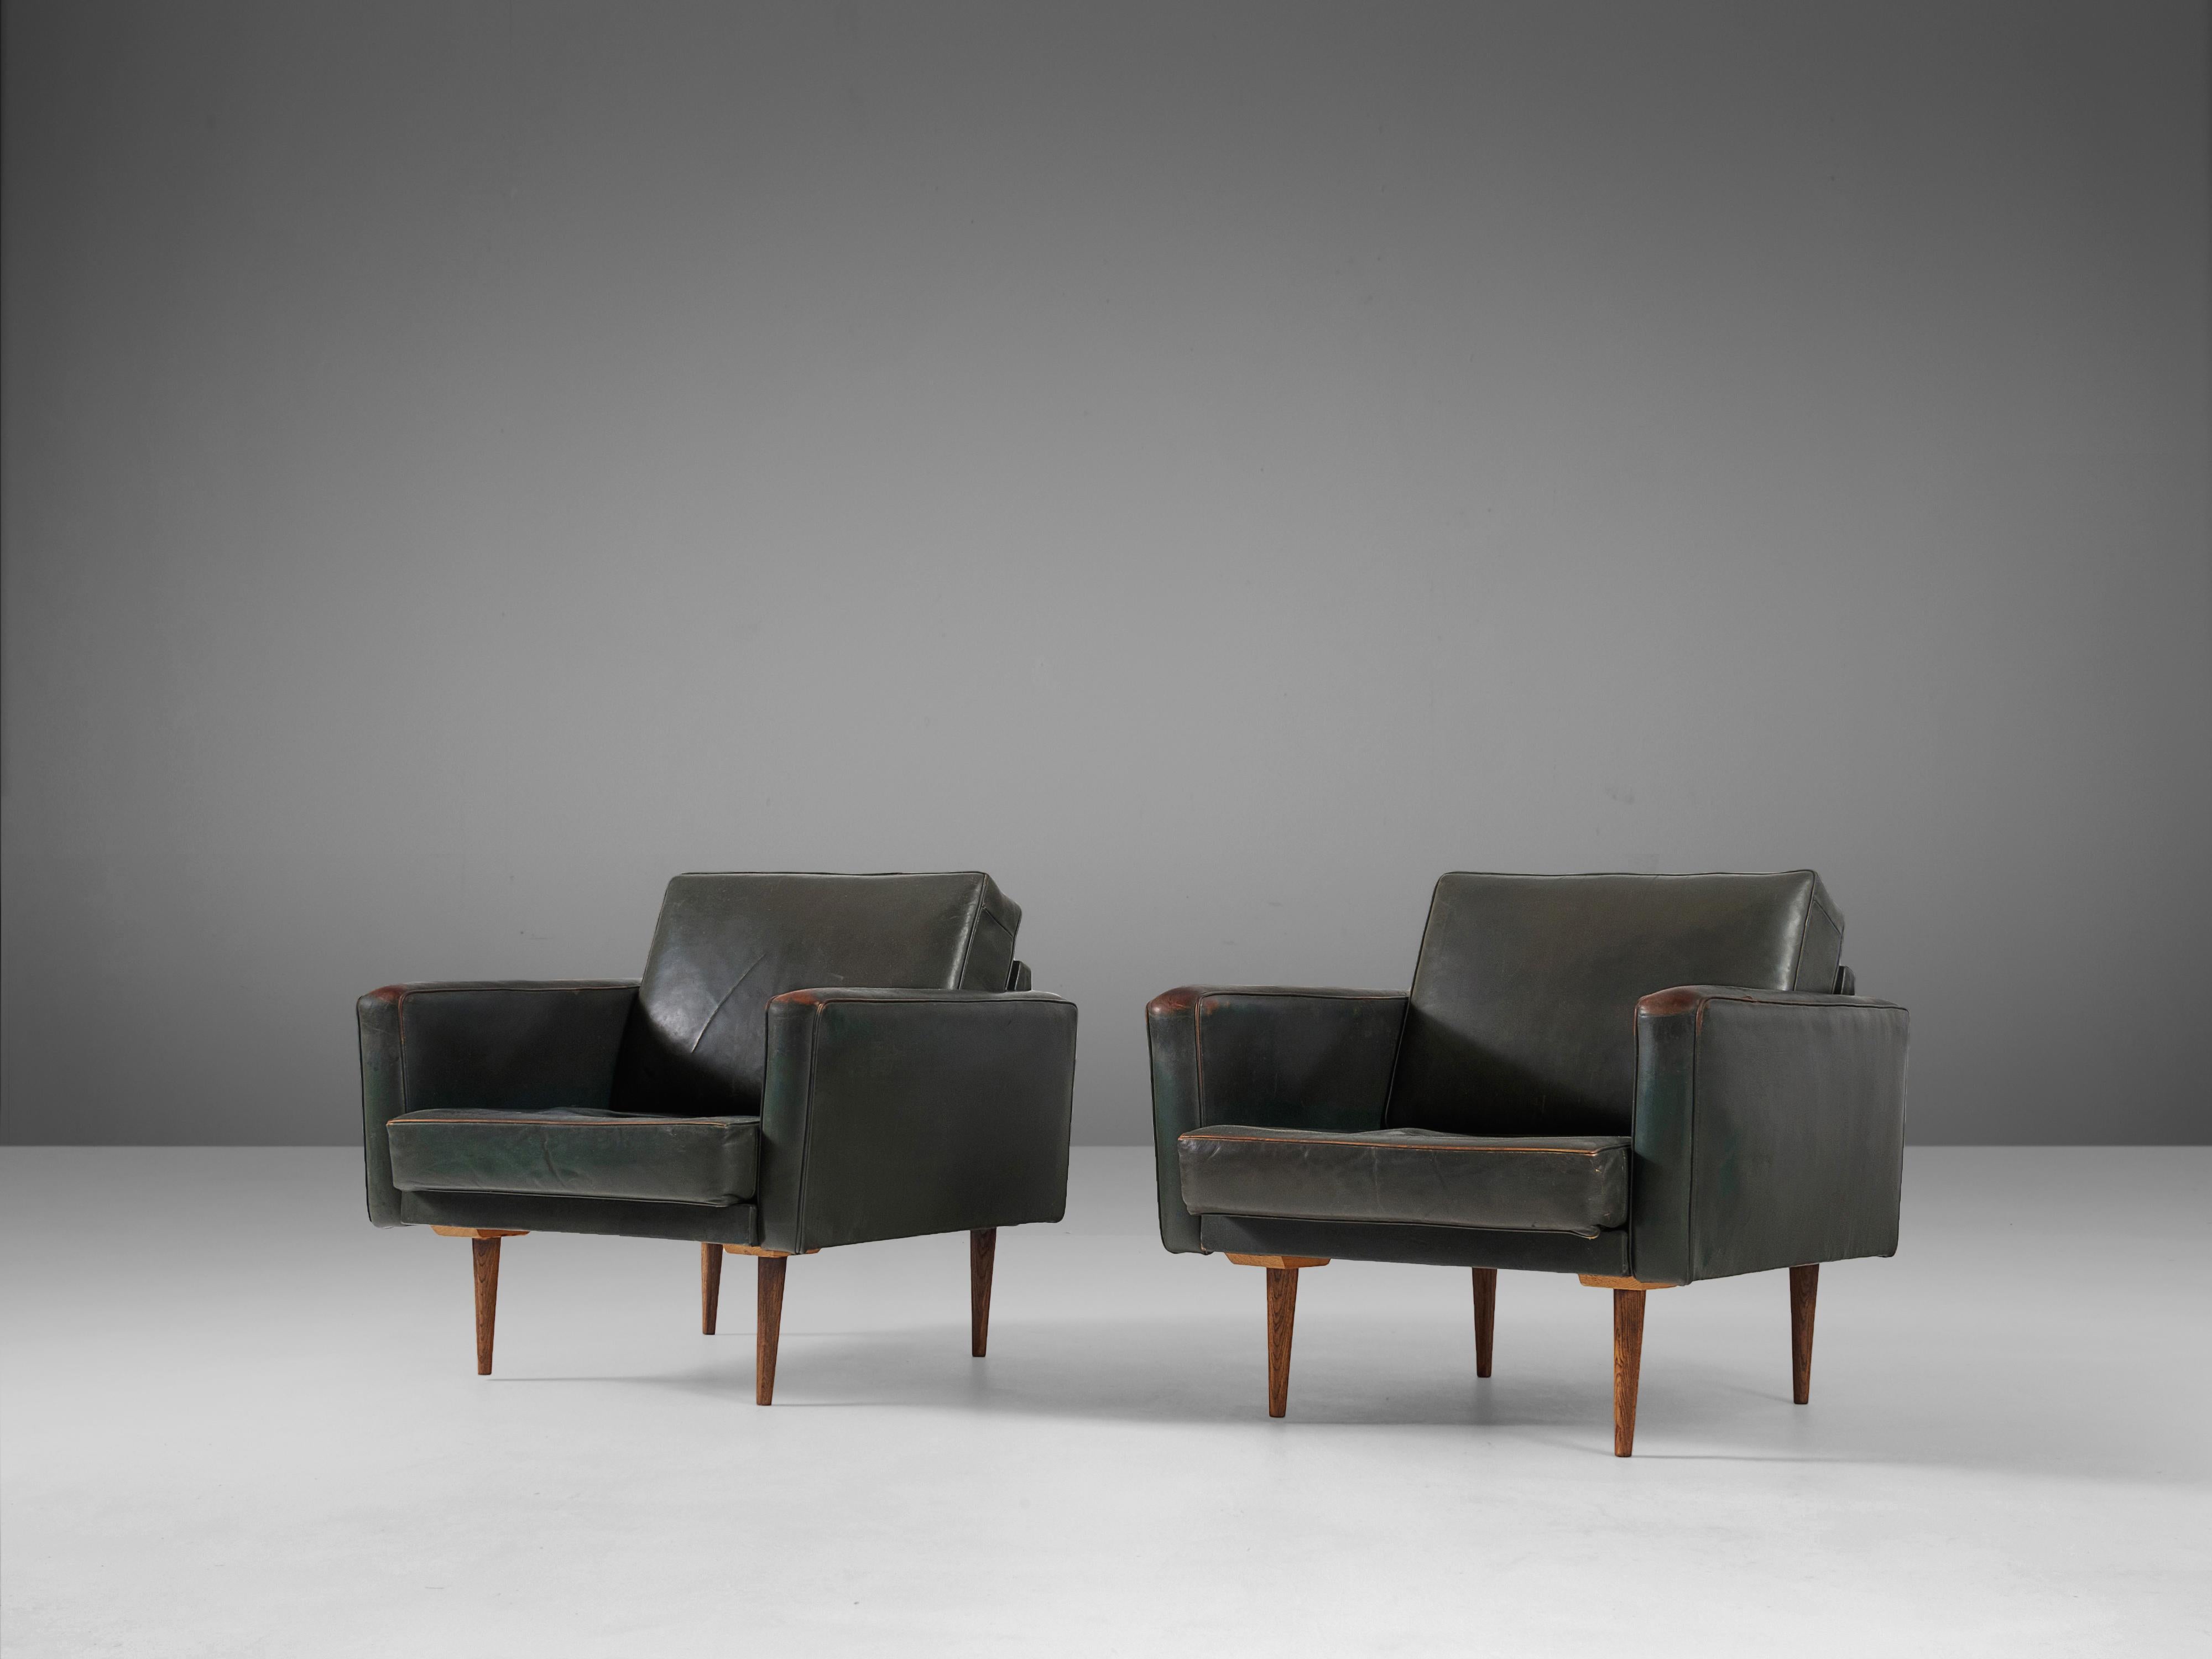 Italian Pair of Lounge Chairs in Patinated Dark Green Leather